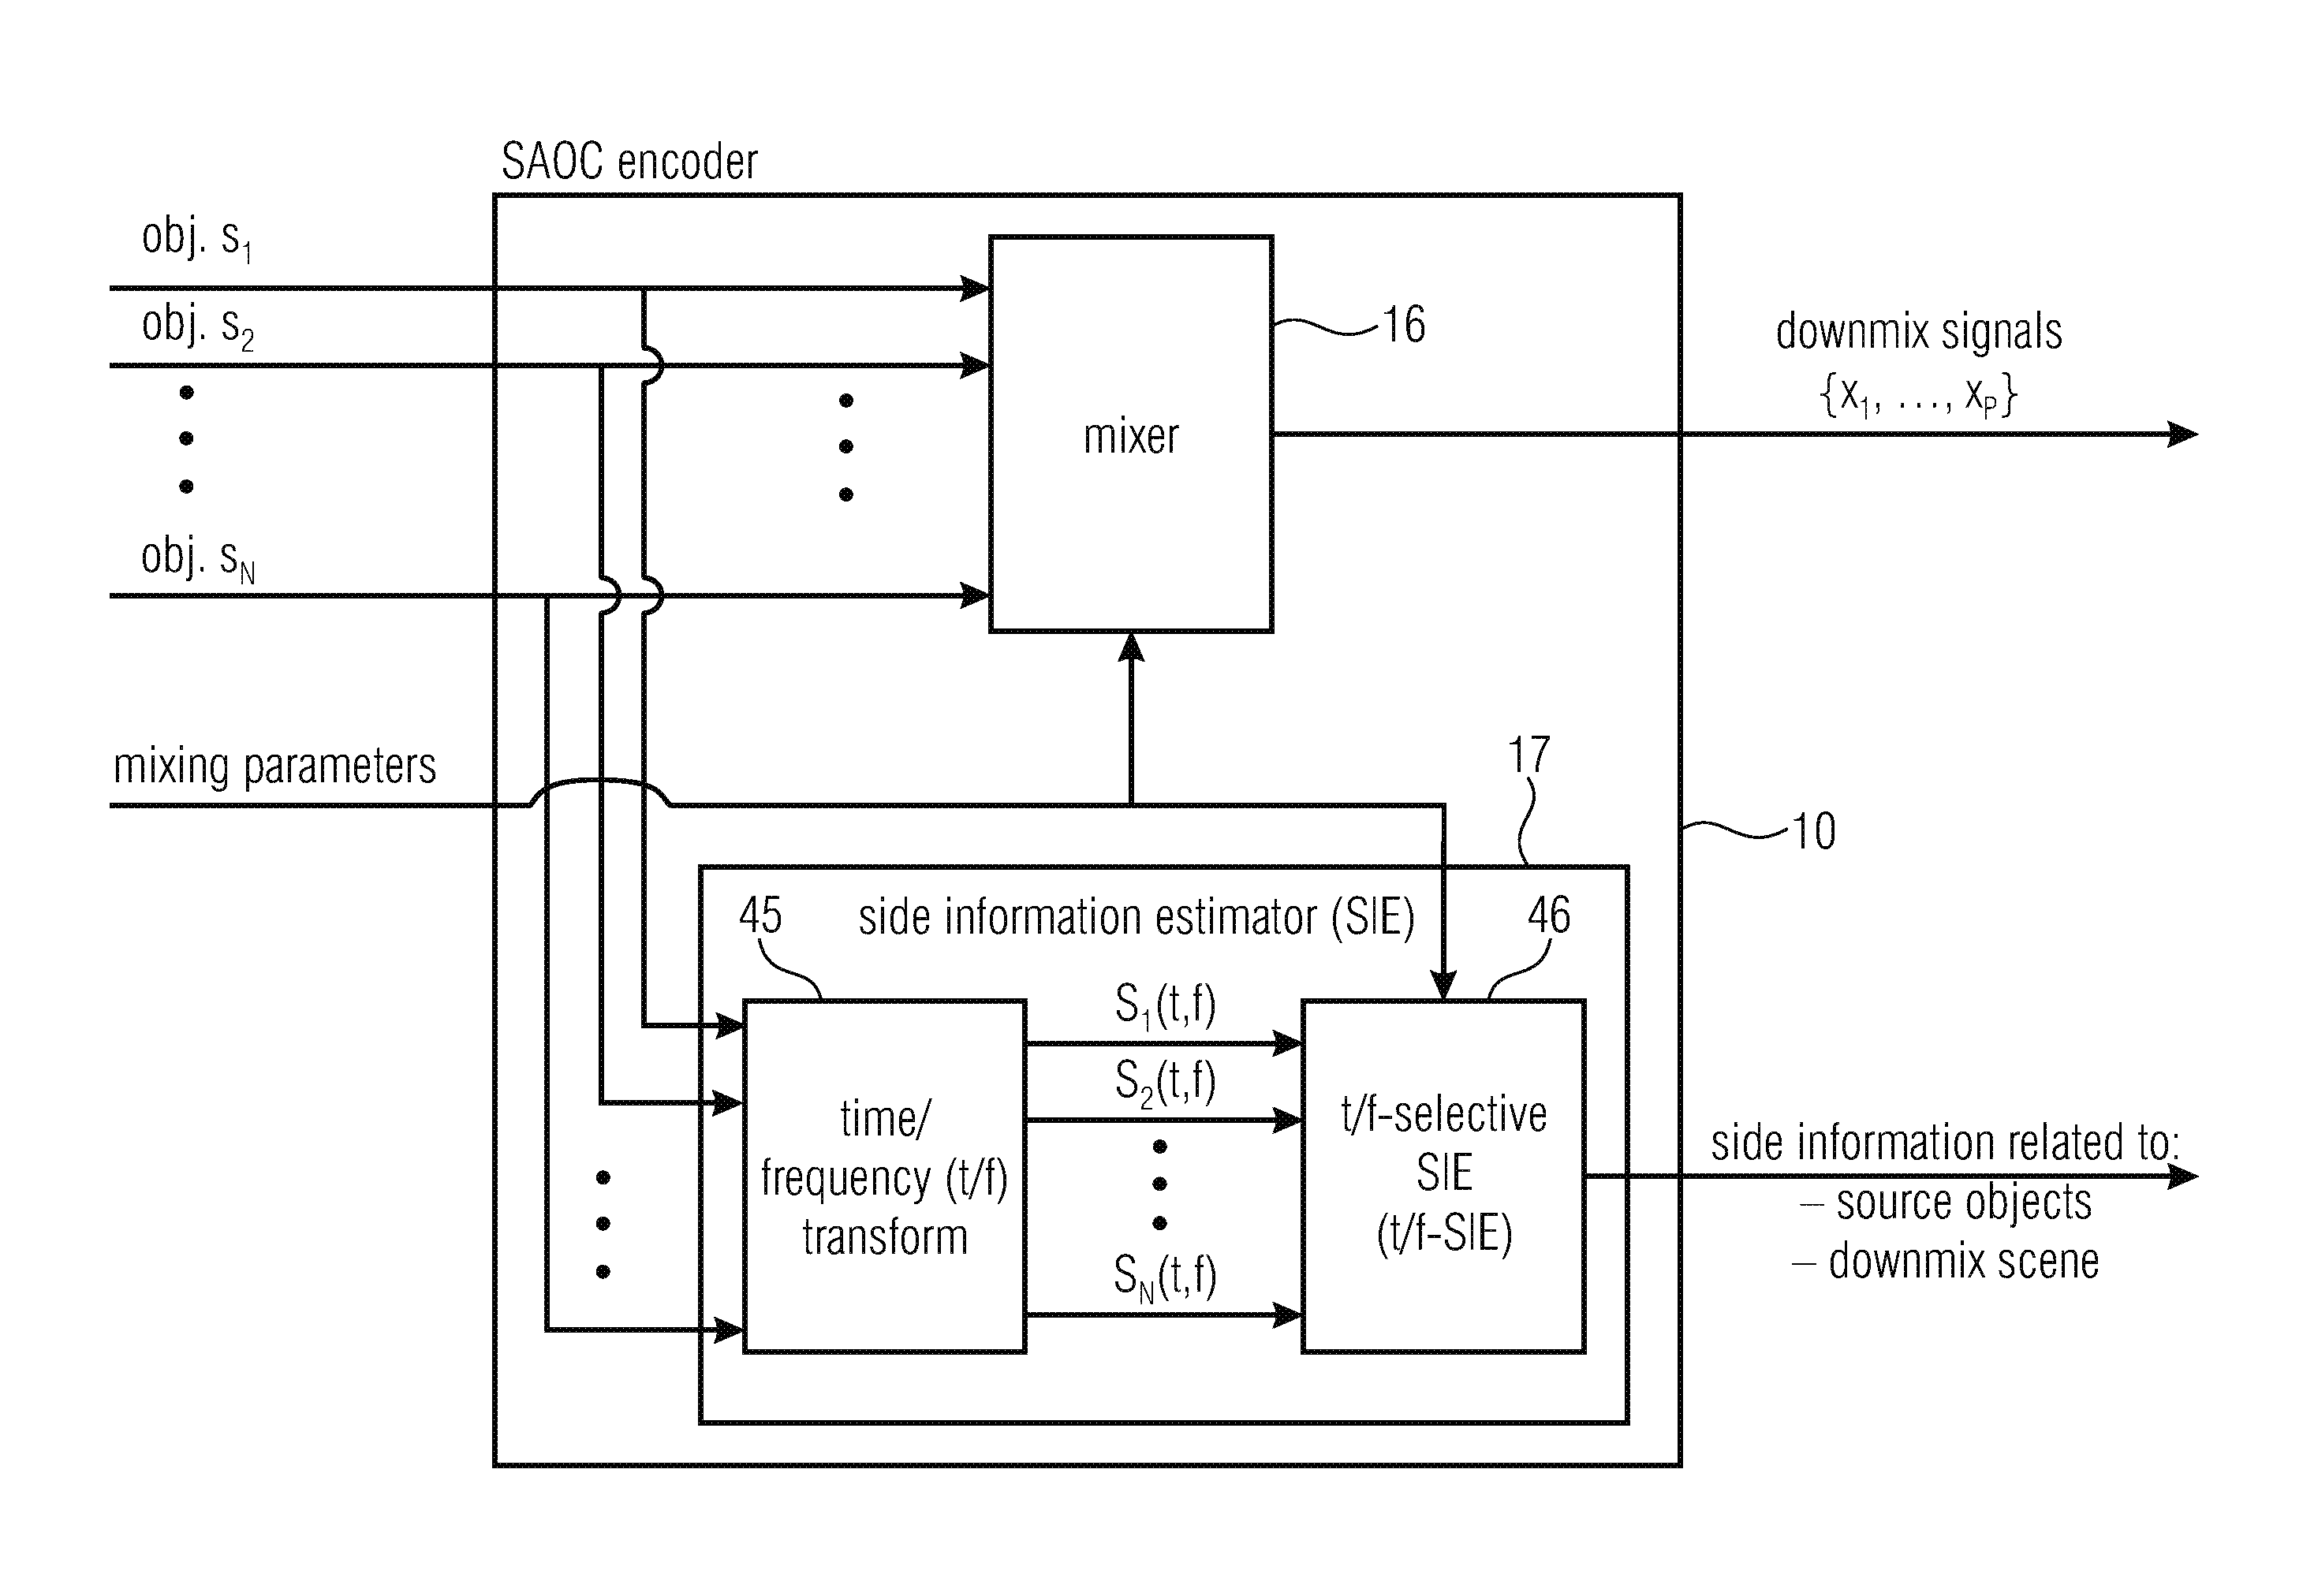 Apparatus and methods for adapting audio information in spatial audio object coding